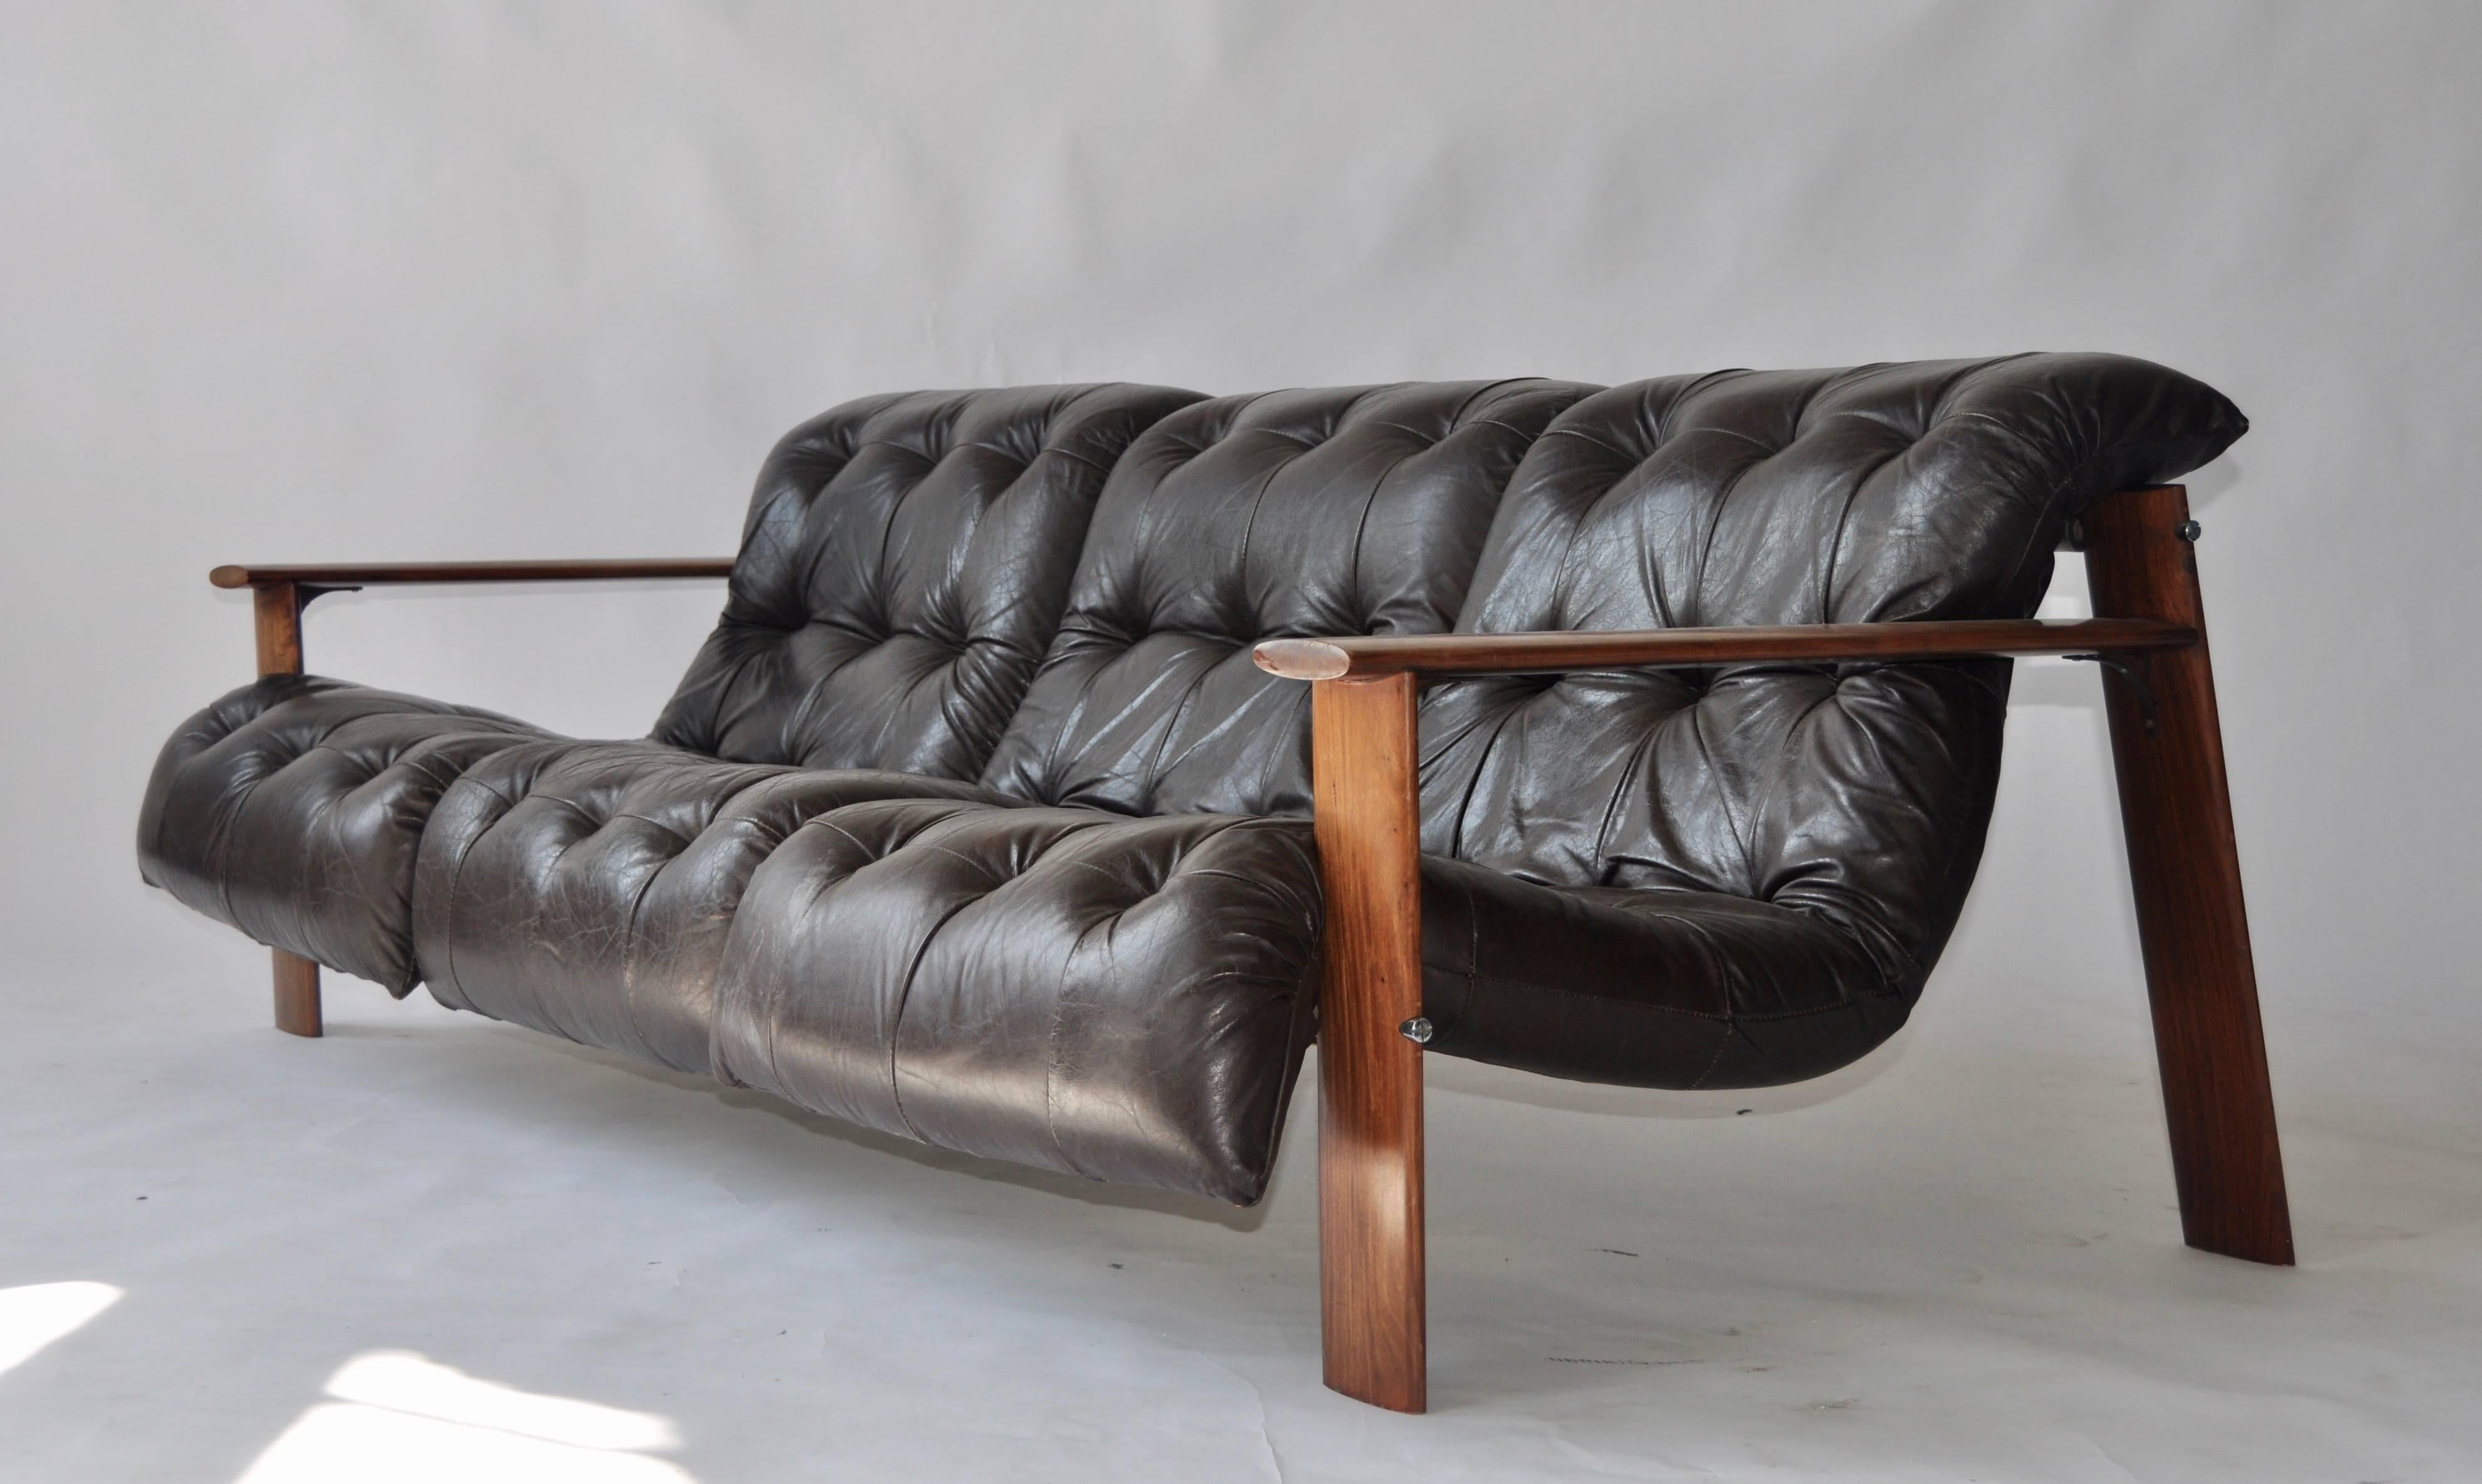 Rosewood and leather sofa by Percival Lafer. Three individual dark brown leather seat cushions. Leather and canvas strapping. Produced by Lafer Furniture.